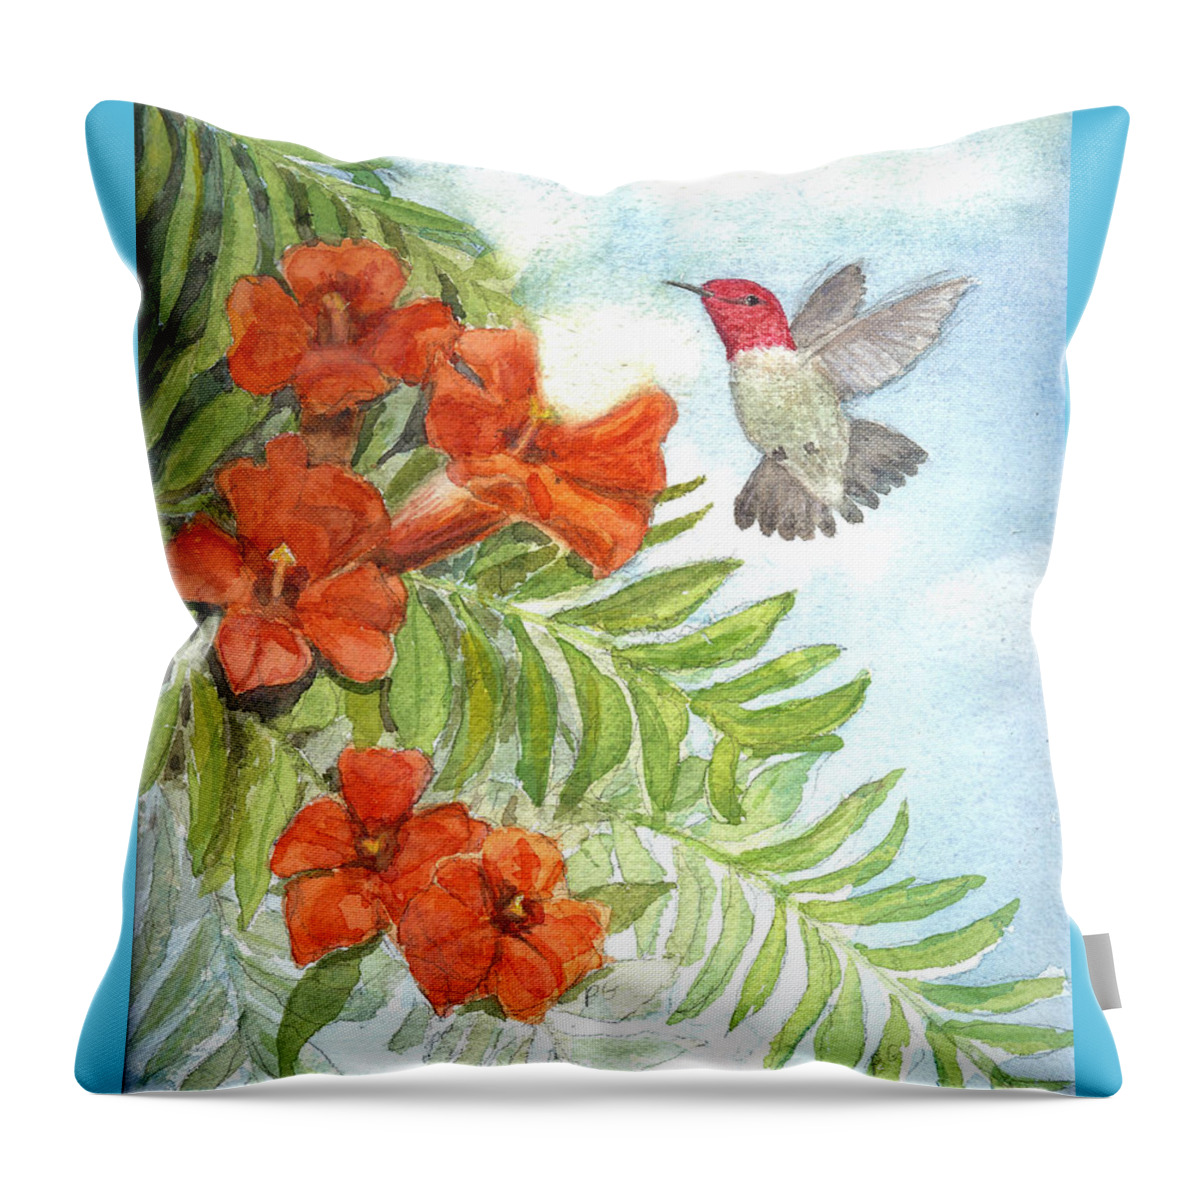 Bird Throw Pillow featuring the painting Great Expectations by Marlene Schwartz Massey